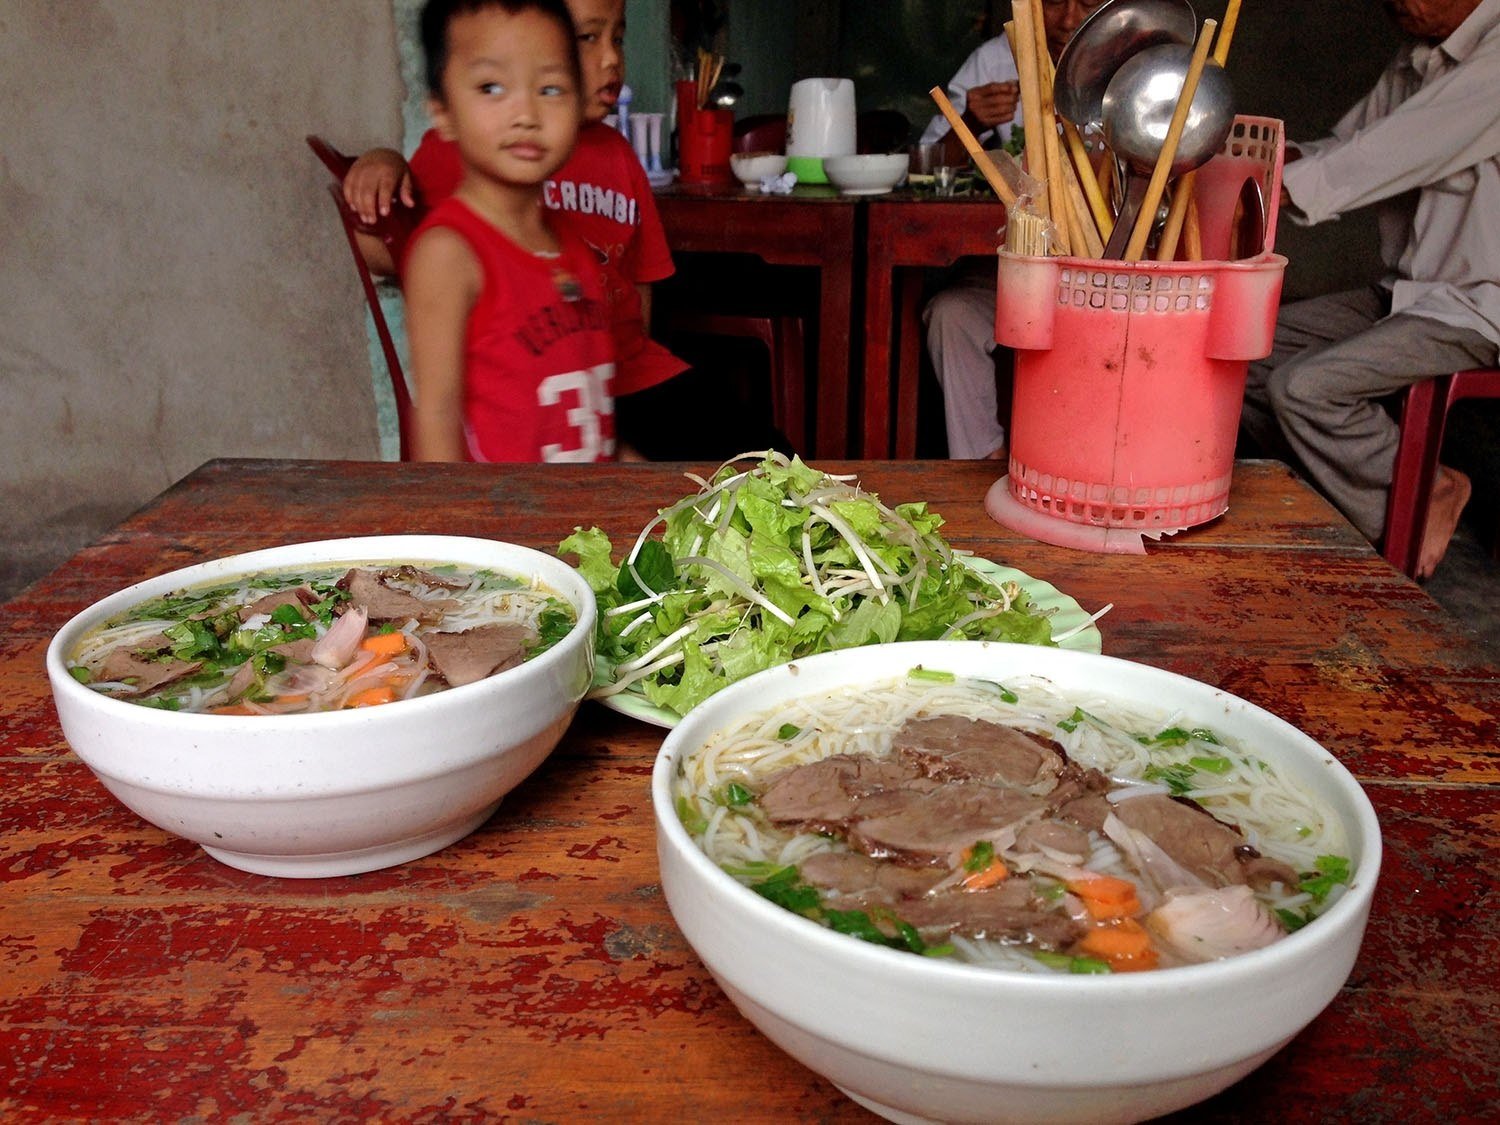 We stopped at this little family restaurant and played with the sons of the owners while they prepared our pho. Oh, and it was some of the best we had in all of Vietnam.